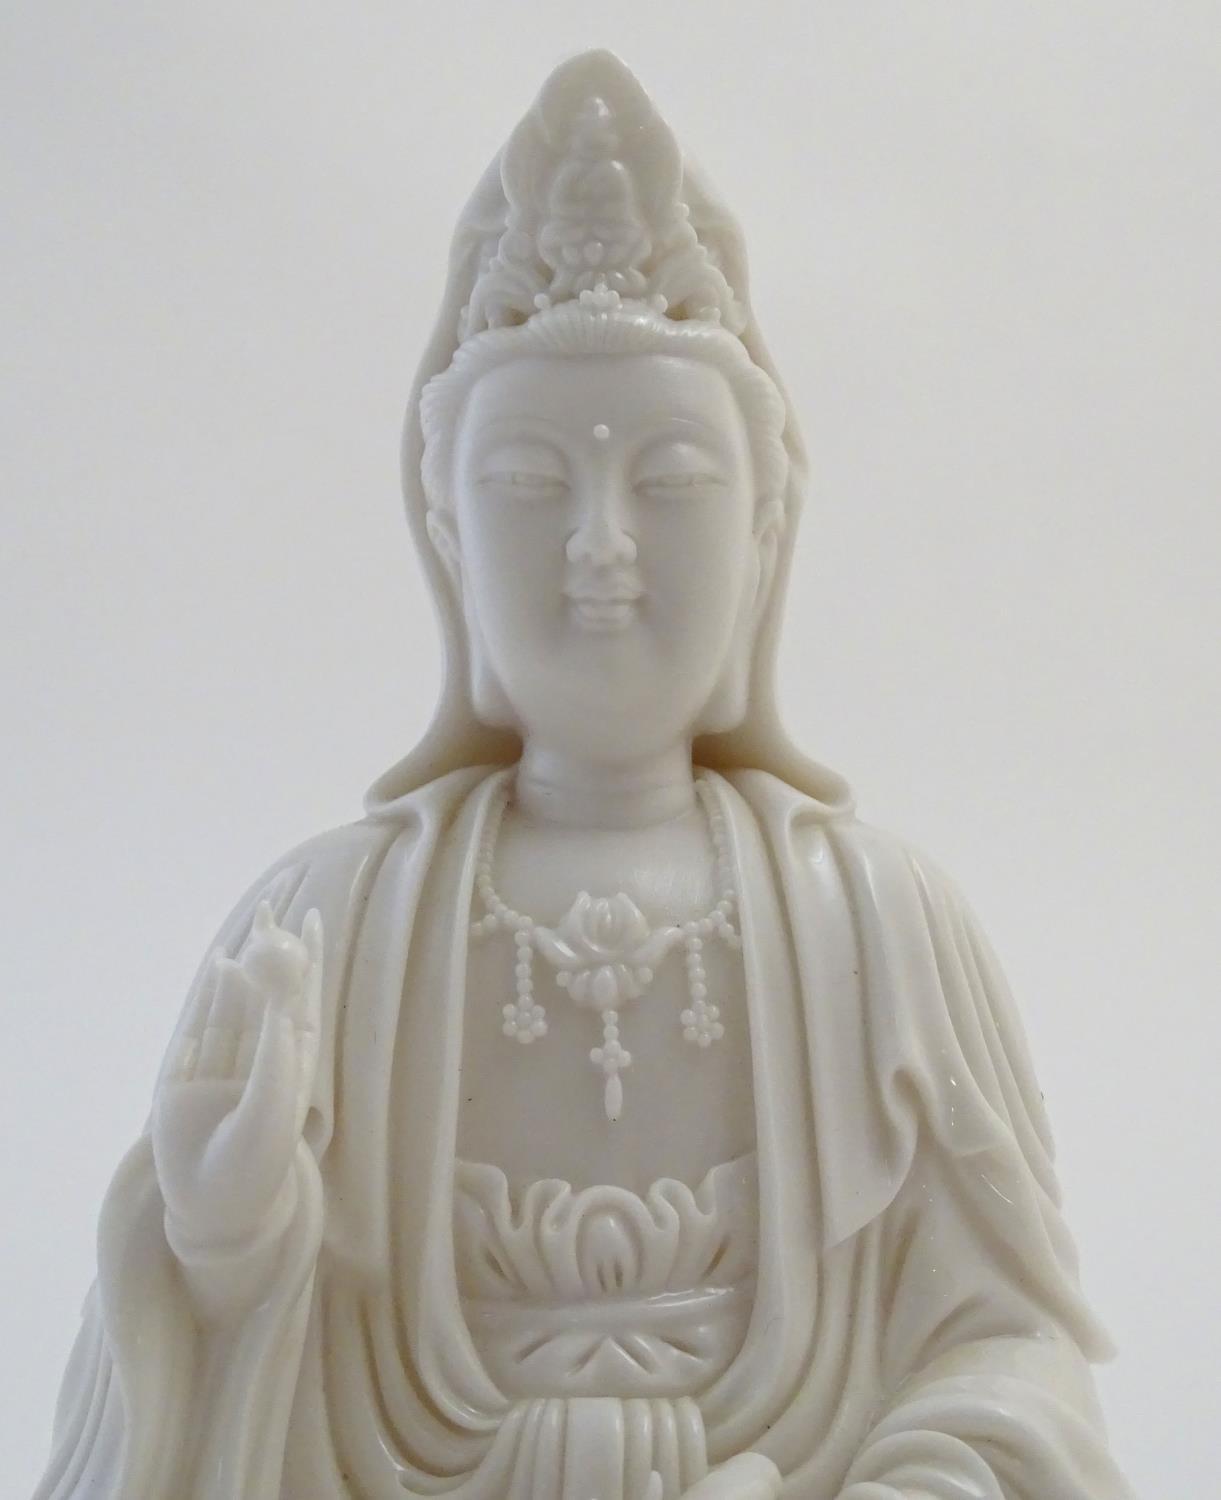 A Chinese blanc de chine figure depicting Guanyin seated on a lotus flower base. Approx. 7 1/2" high - Image 5 of 16